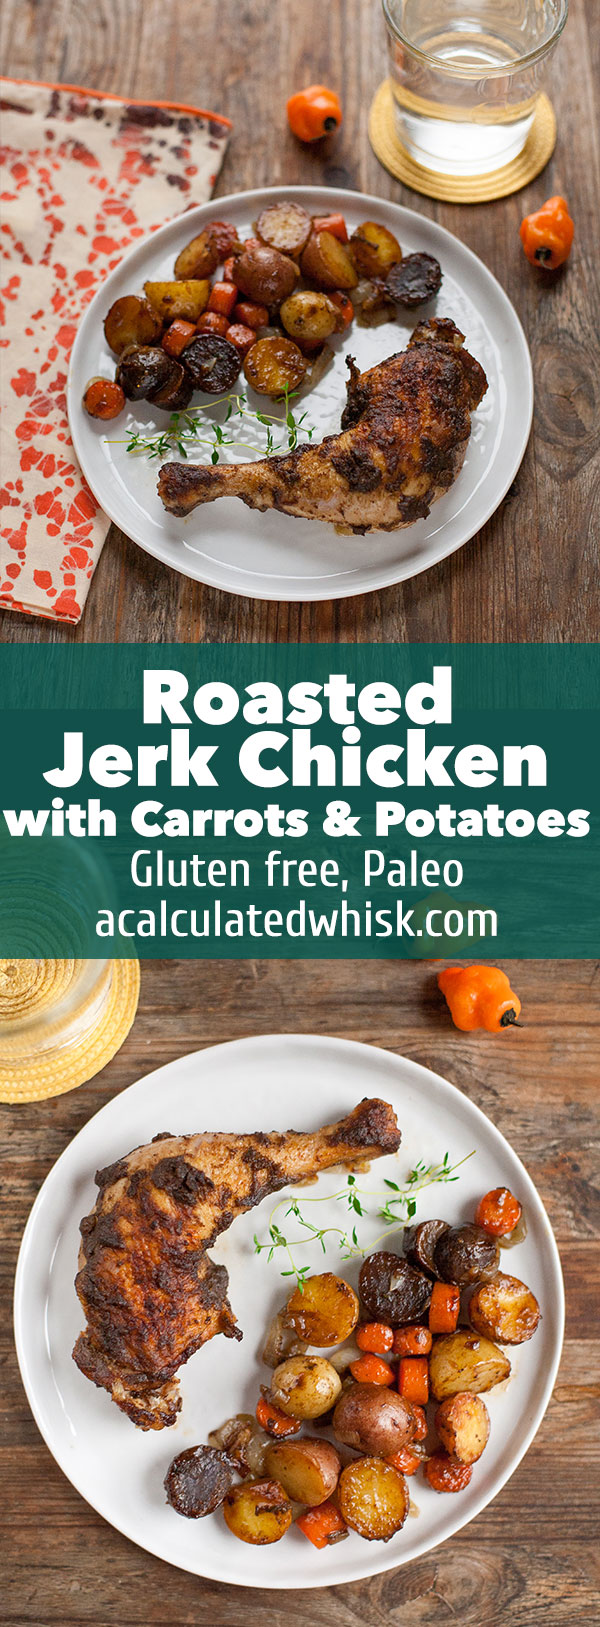 Roasted Jerk Chicken with Carrots and Potatoes (Gluten free, Paleo, Whole30) acalculatedwhisk.com 